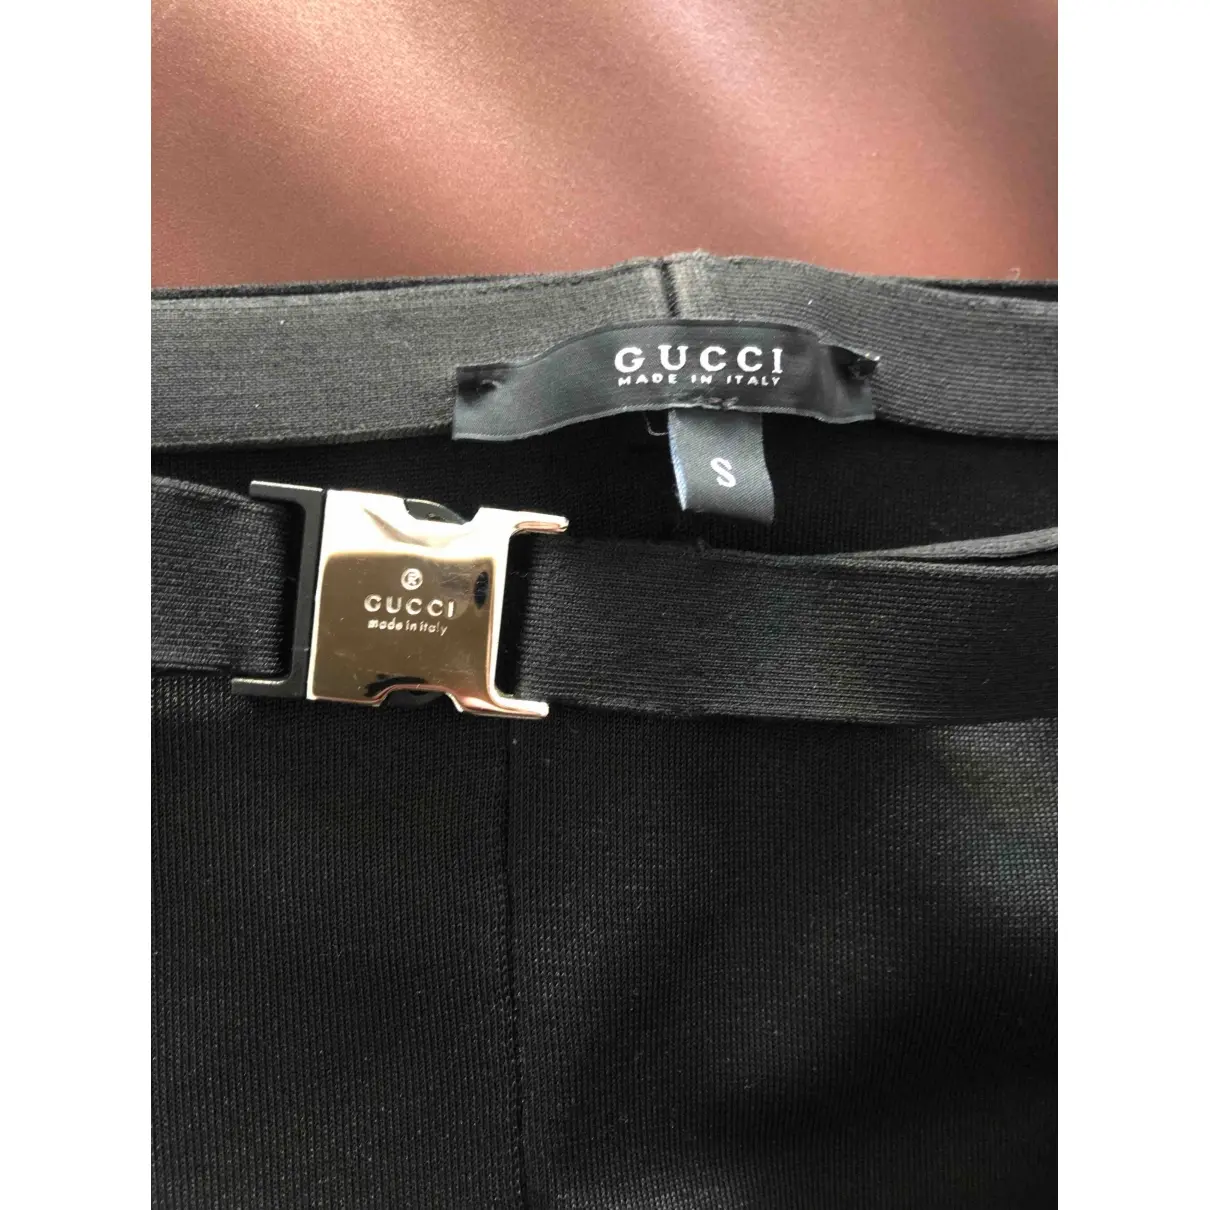 Buy Gucci Black Polyester Shorts online